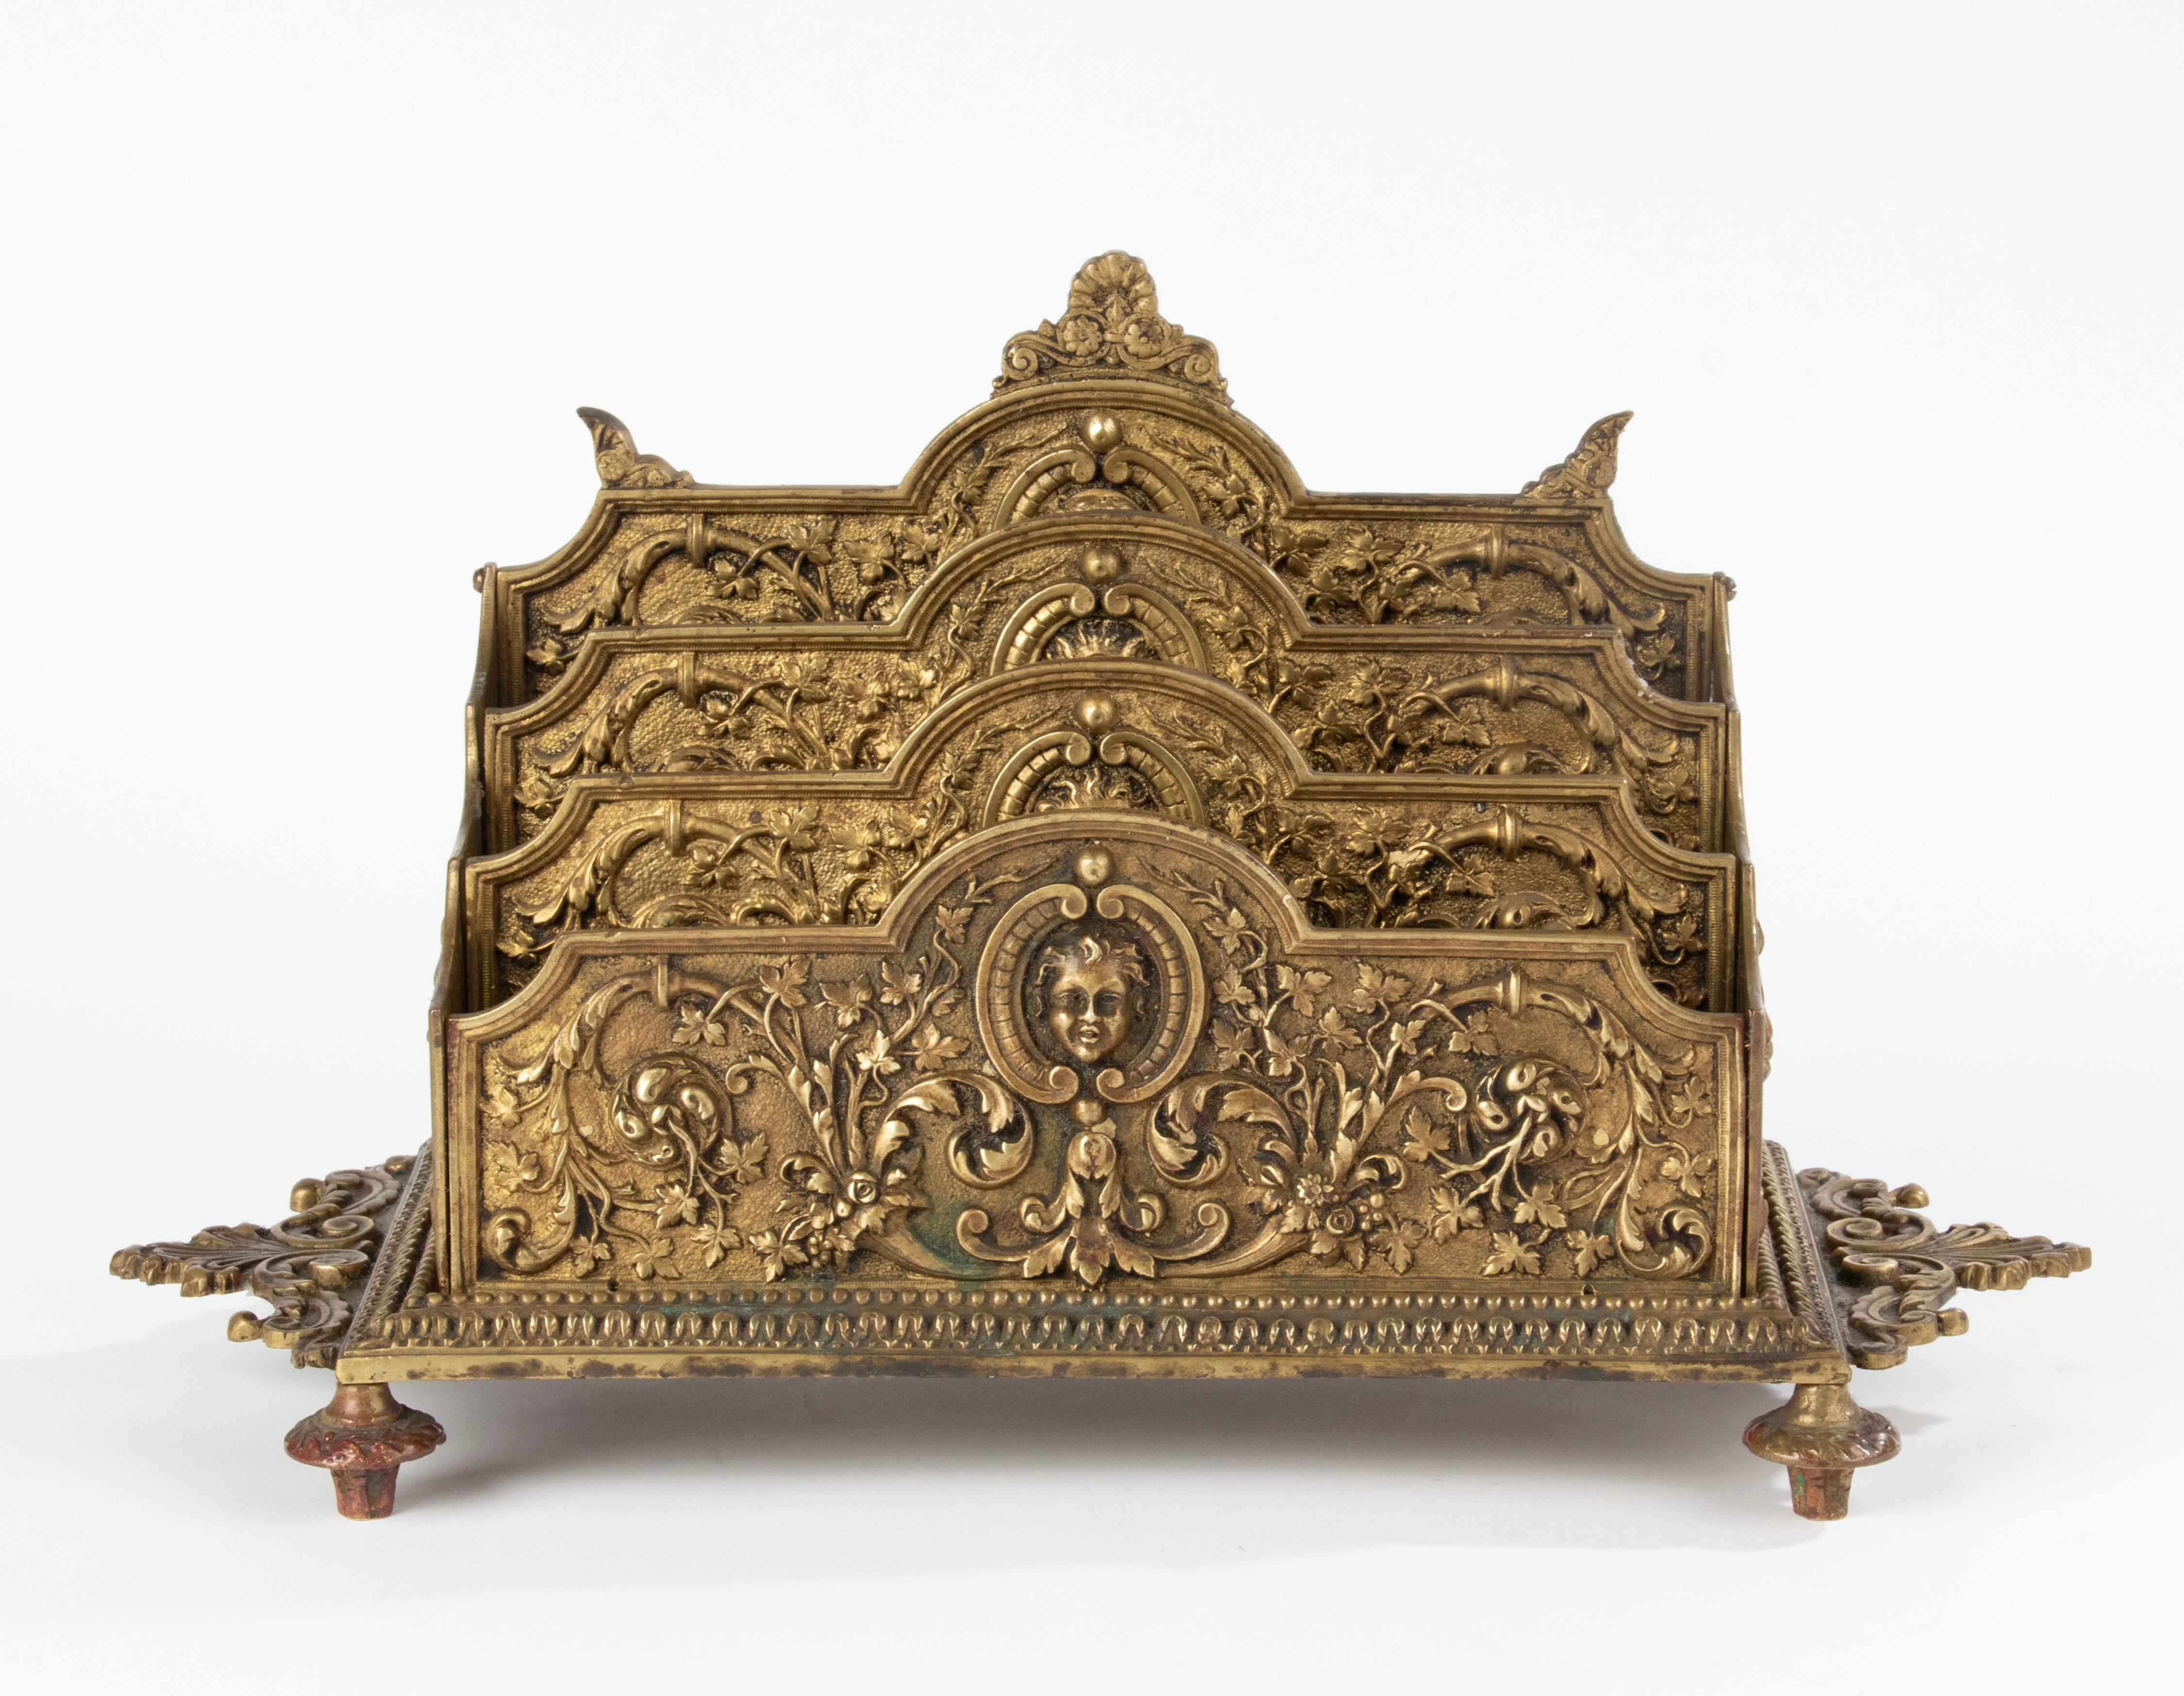 Early 20th century French bronze letter rack, richly decorated with ornaments, scrolls and heads, in Renaissance style. Heavy quality bronze as well as very refined. Made in France, 1900-1910. Some wear and tear on the patina
Dimensions: 21(h) x 35